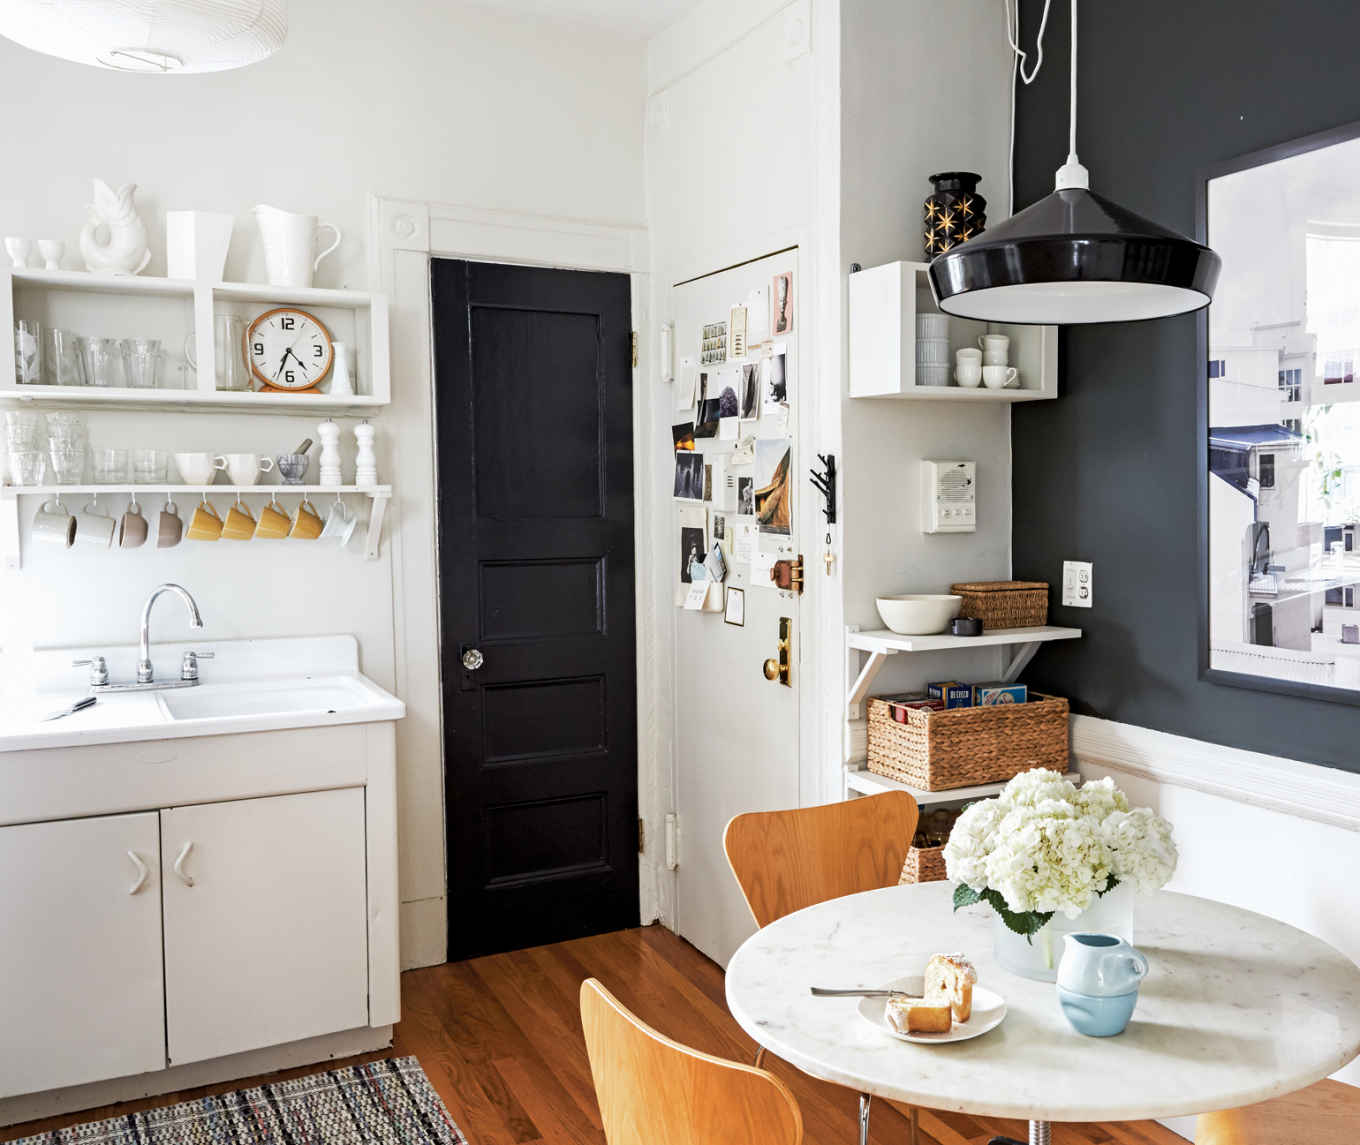 THE DARK SIDE. This kitchen’s moody character is all thanks to its deep gray accents (Benjamin Moore’s “Deep River”), which jump from the bathroom door to the wall (at right).